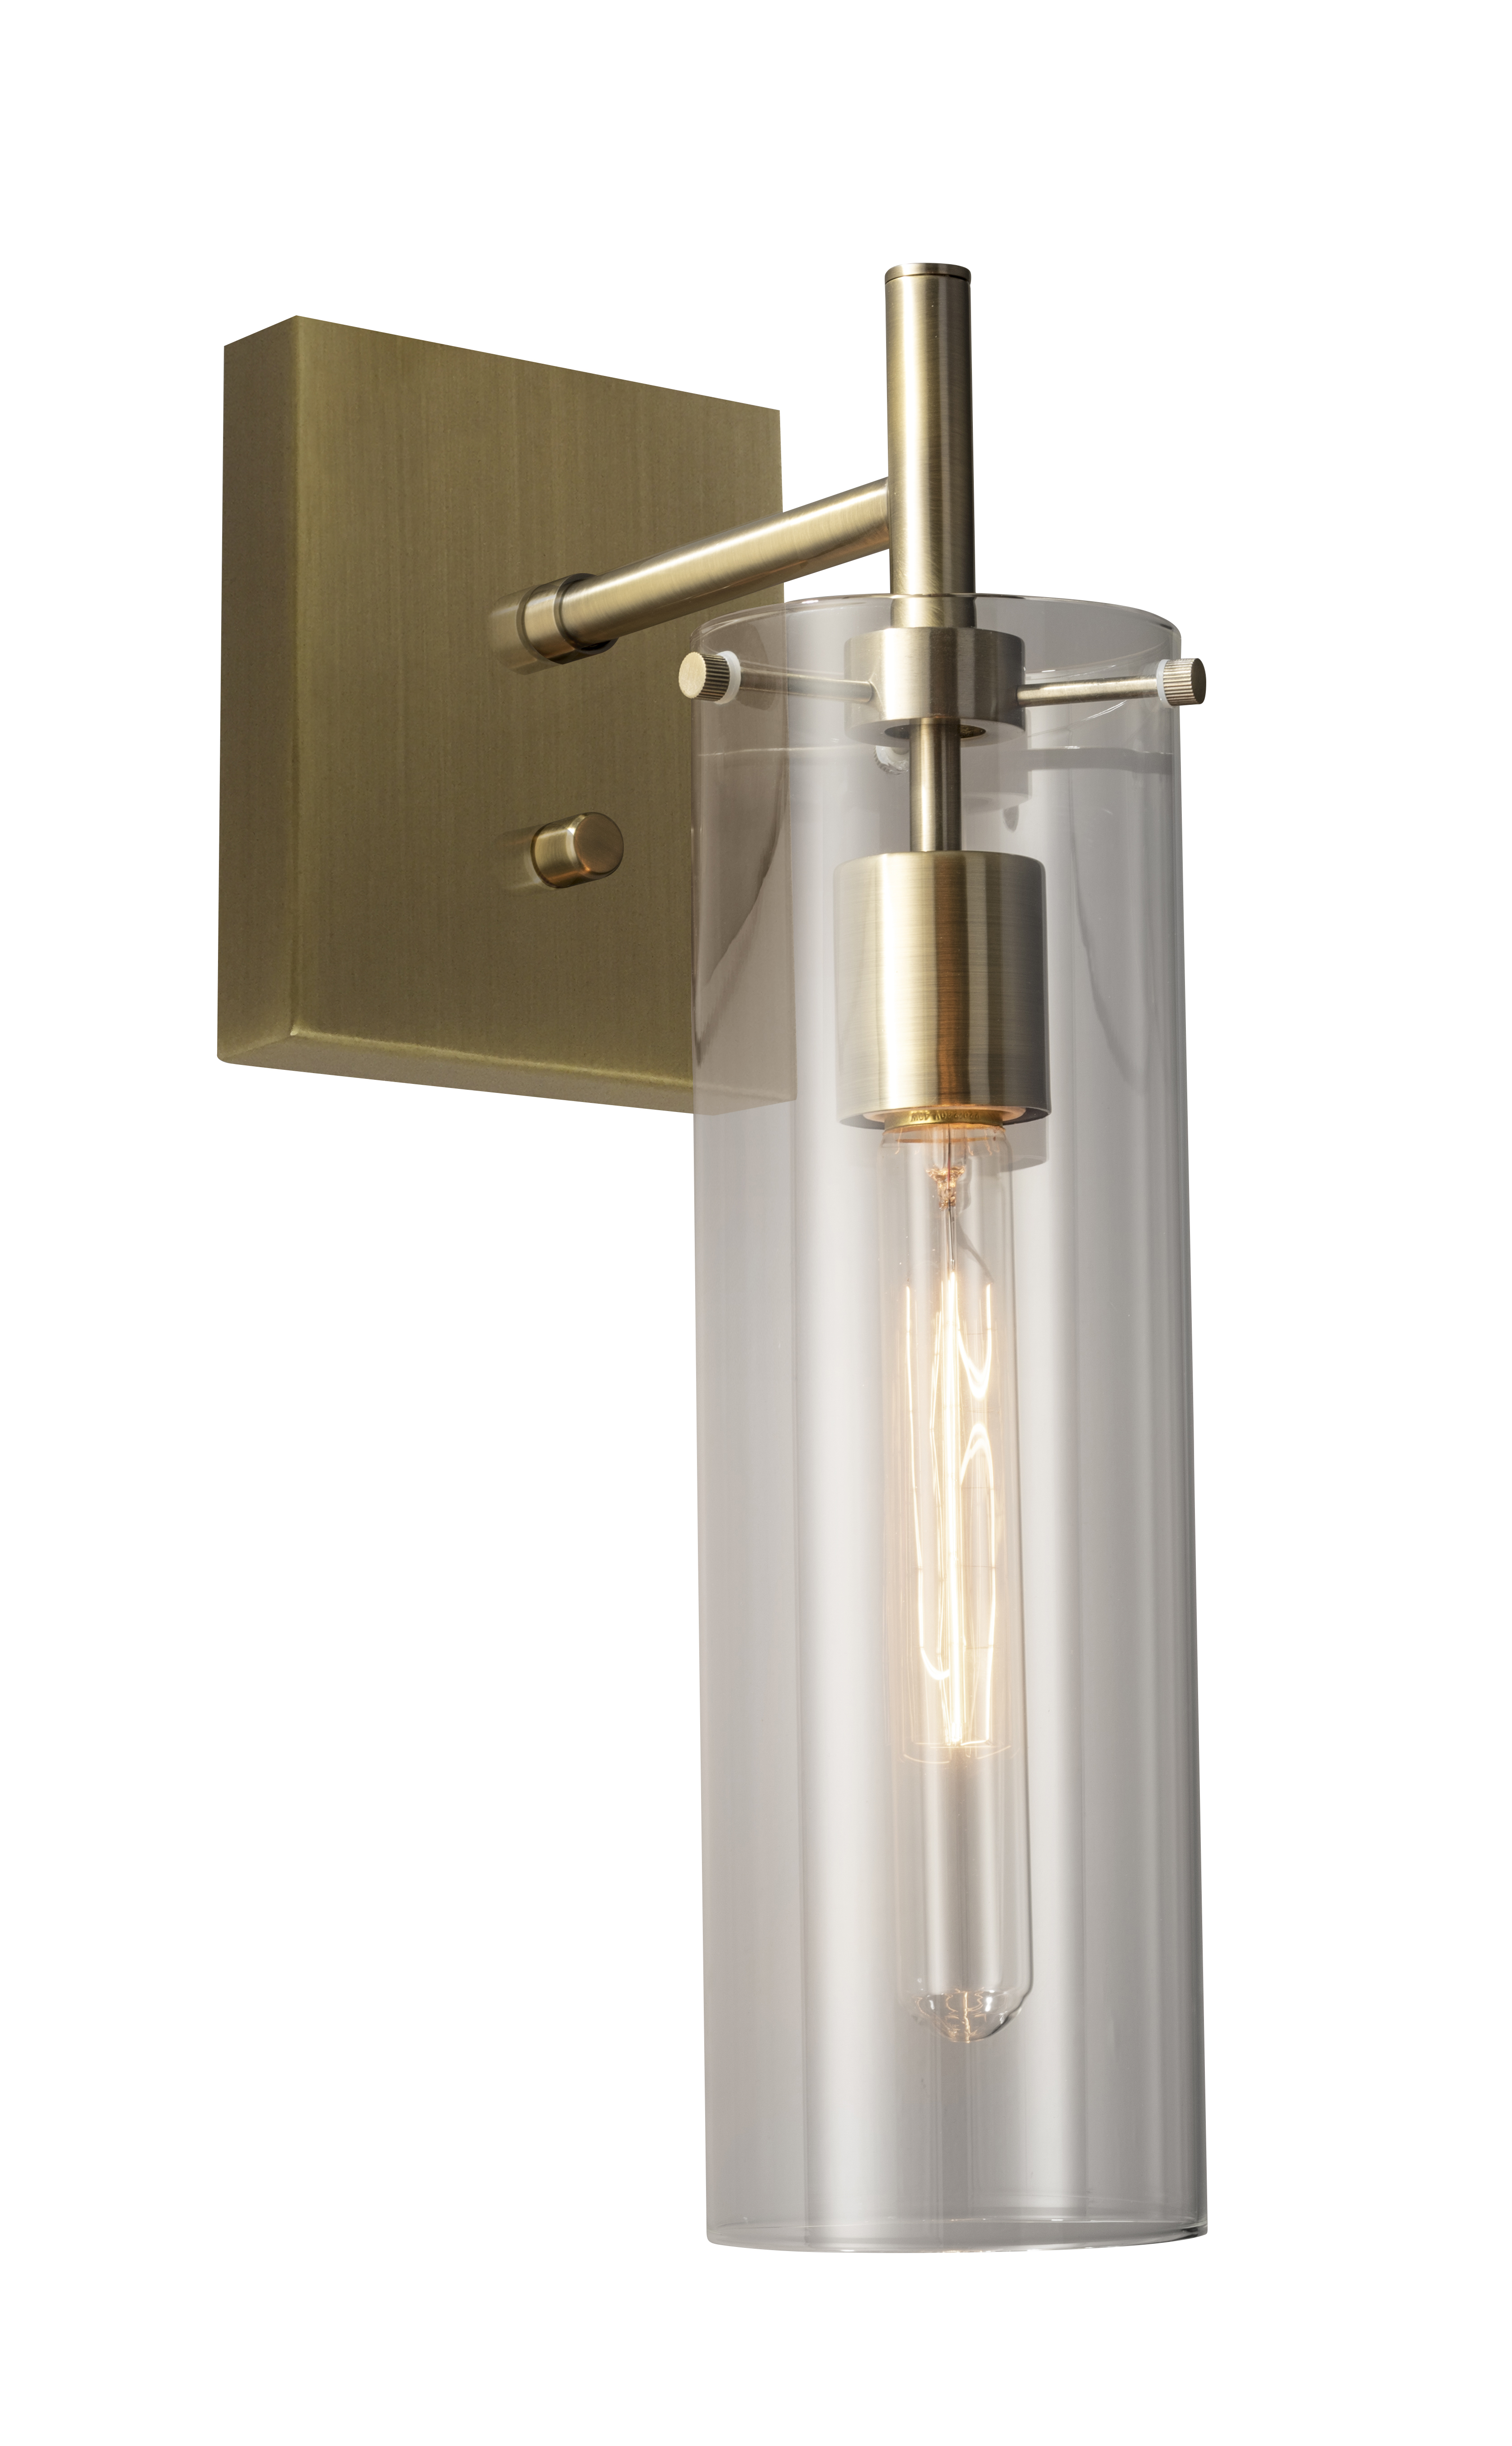 Dalton wall sconce in brass with Edison bulb from Adesso